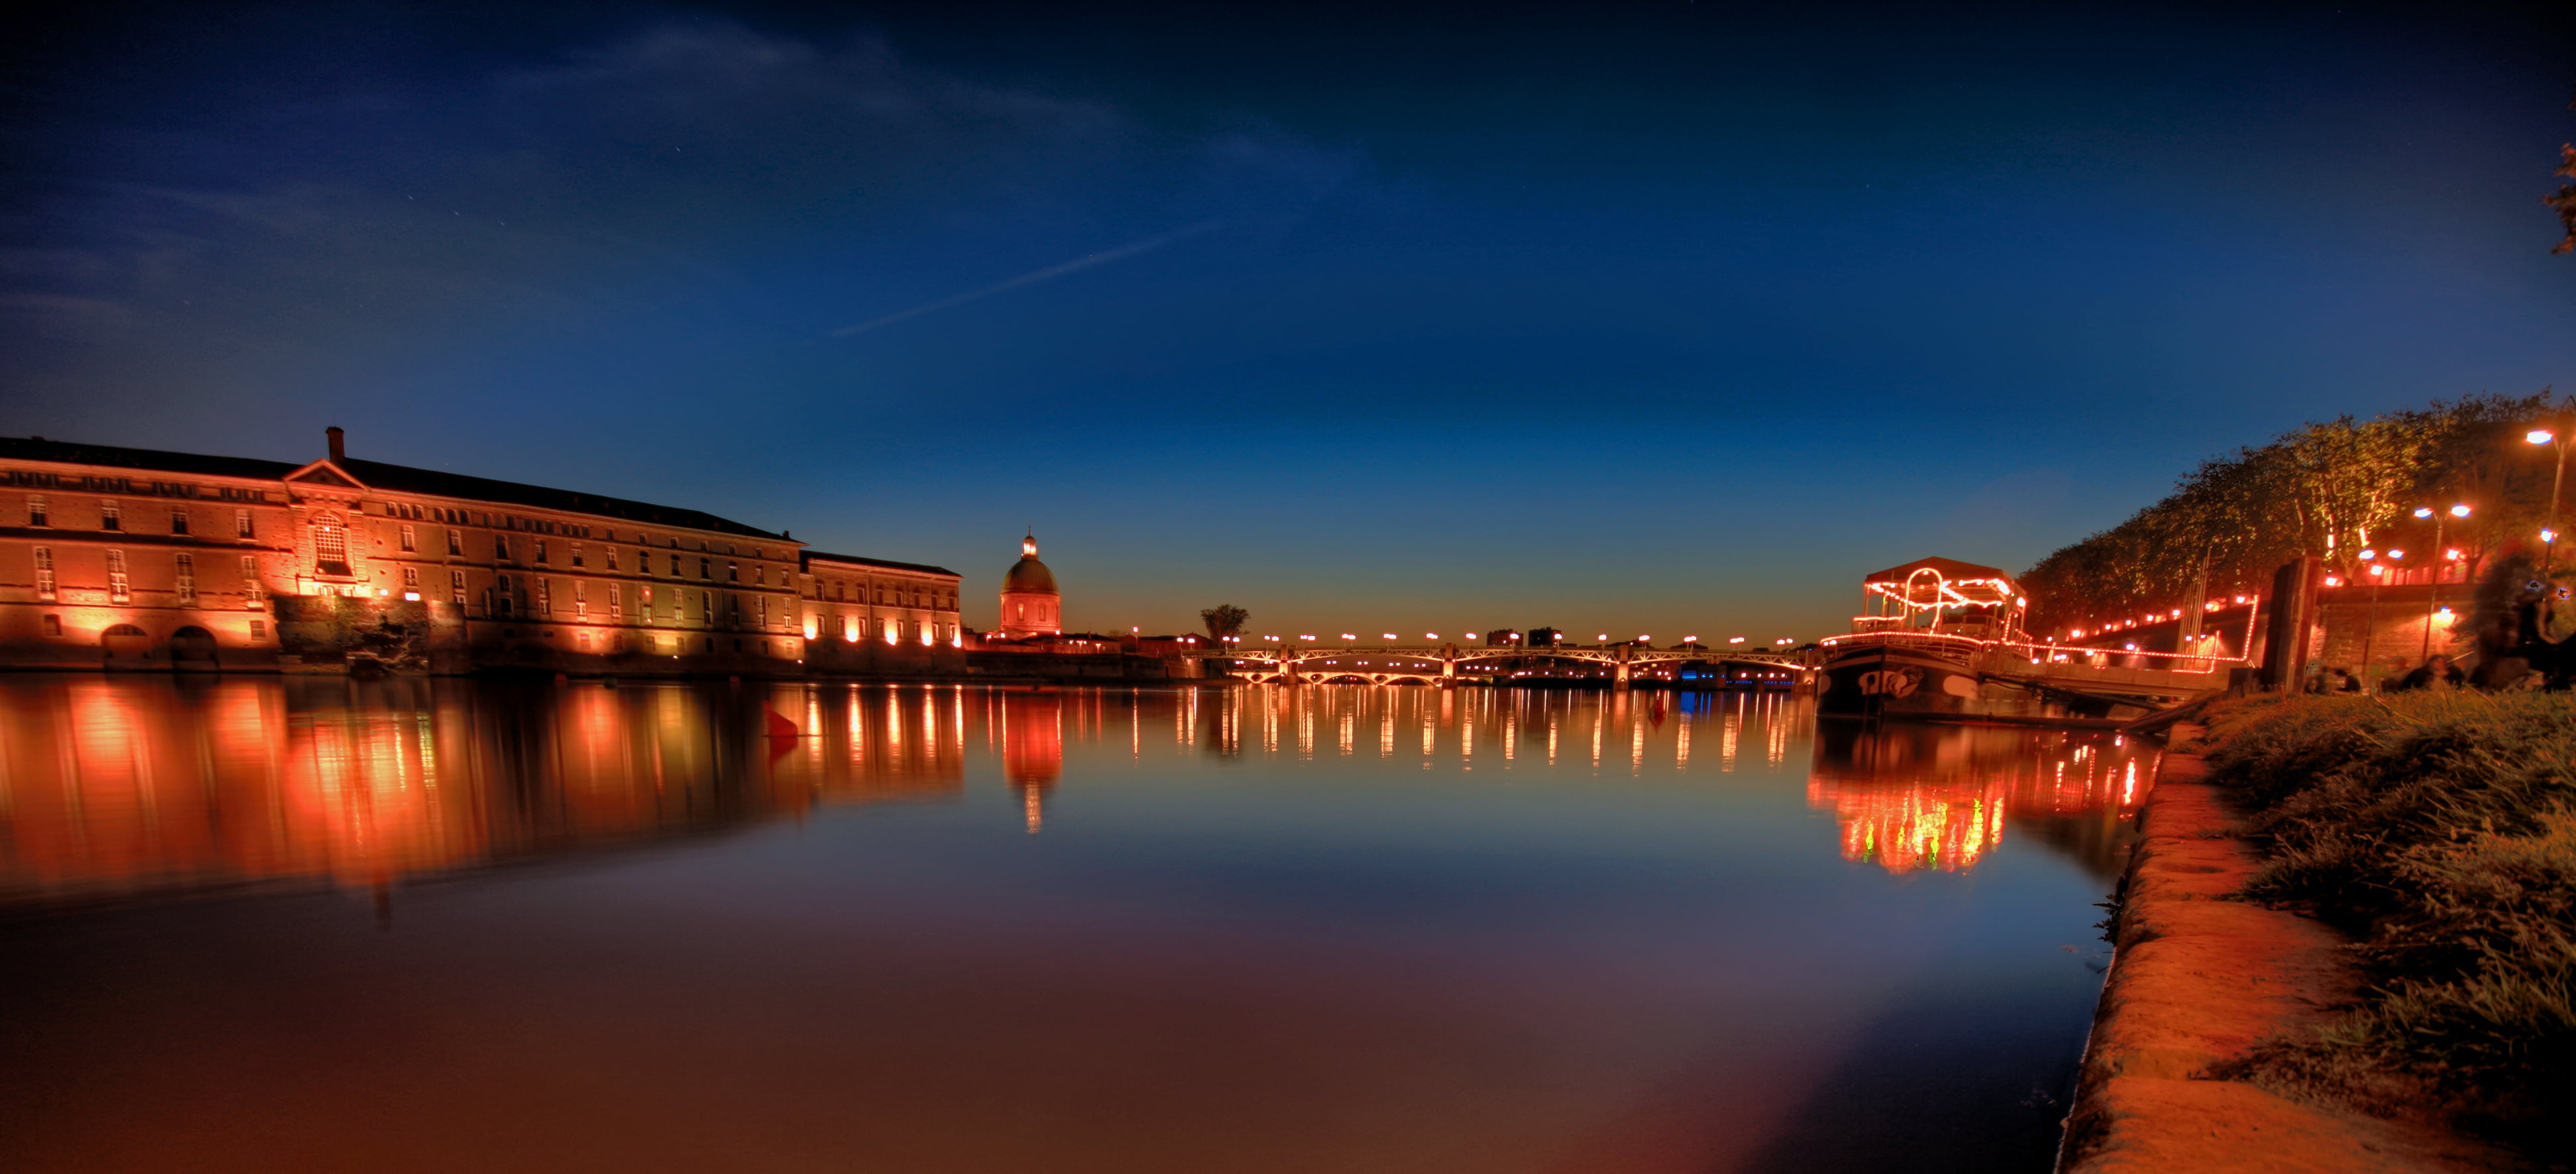 reflection of lighted city buildings on body of water during nighttime, garonne, garonne